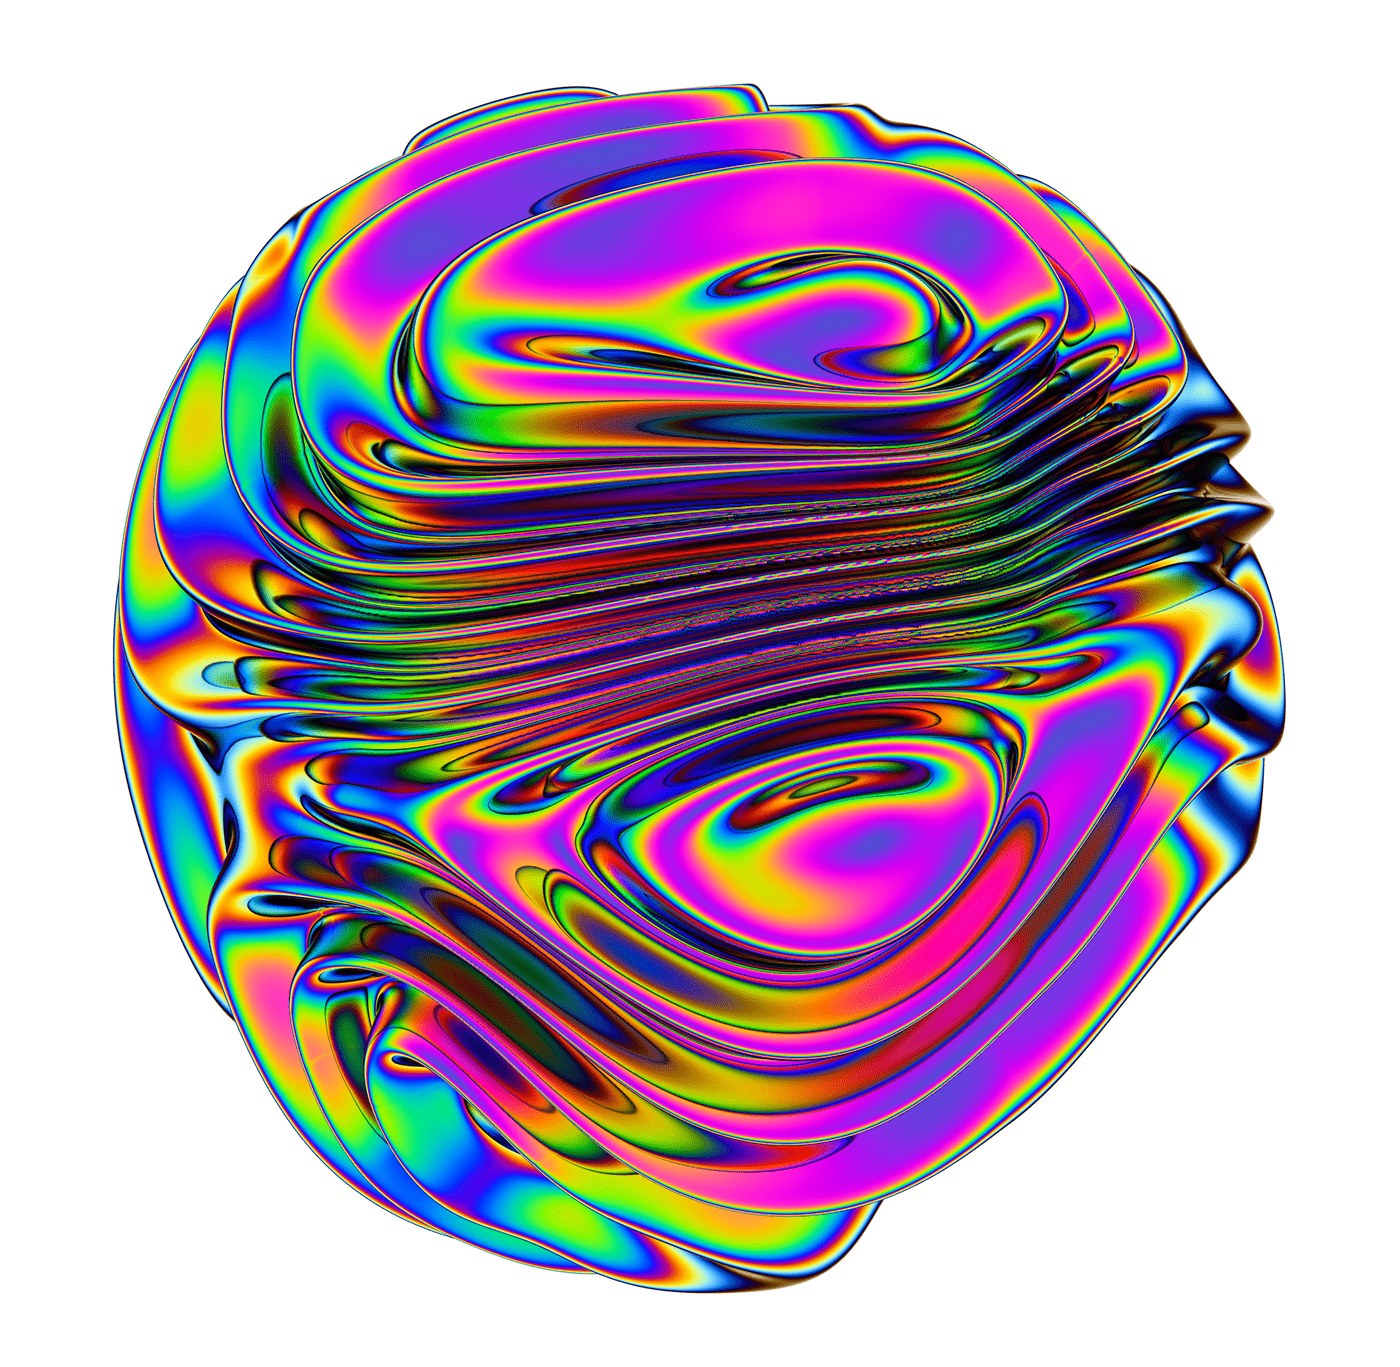 80s 90s art cool Glitch gradient holographic Melt sphere surreal